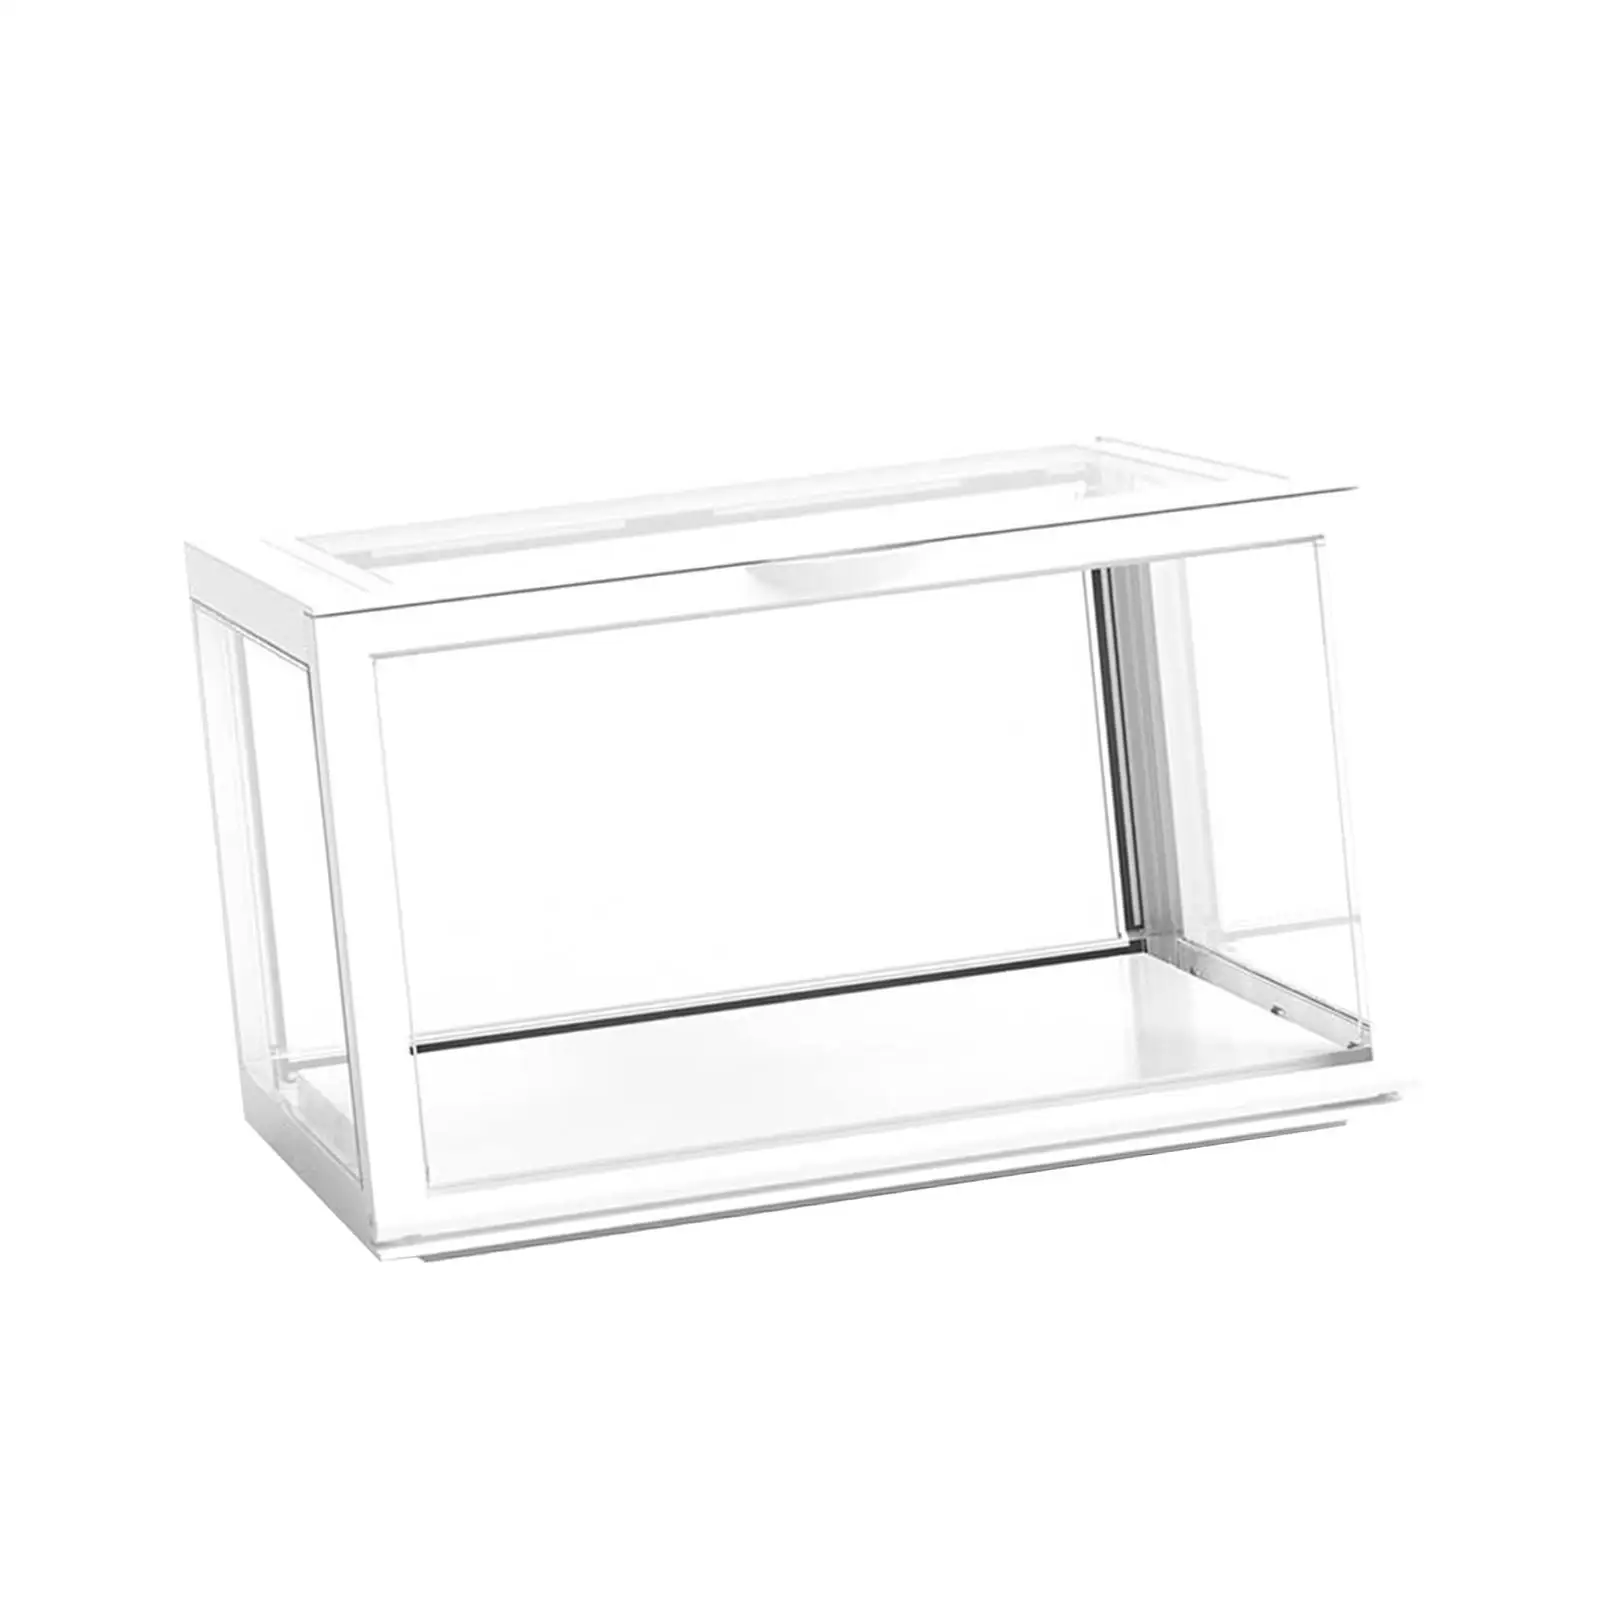 Acrylic Clear Display Case Dustproof Showcase Handicrafts Storage Shelf for Souvenirs Cosmetics Action Figures Toys Collectibles